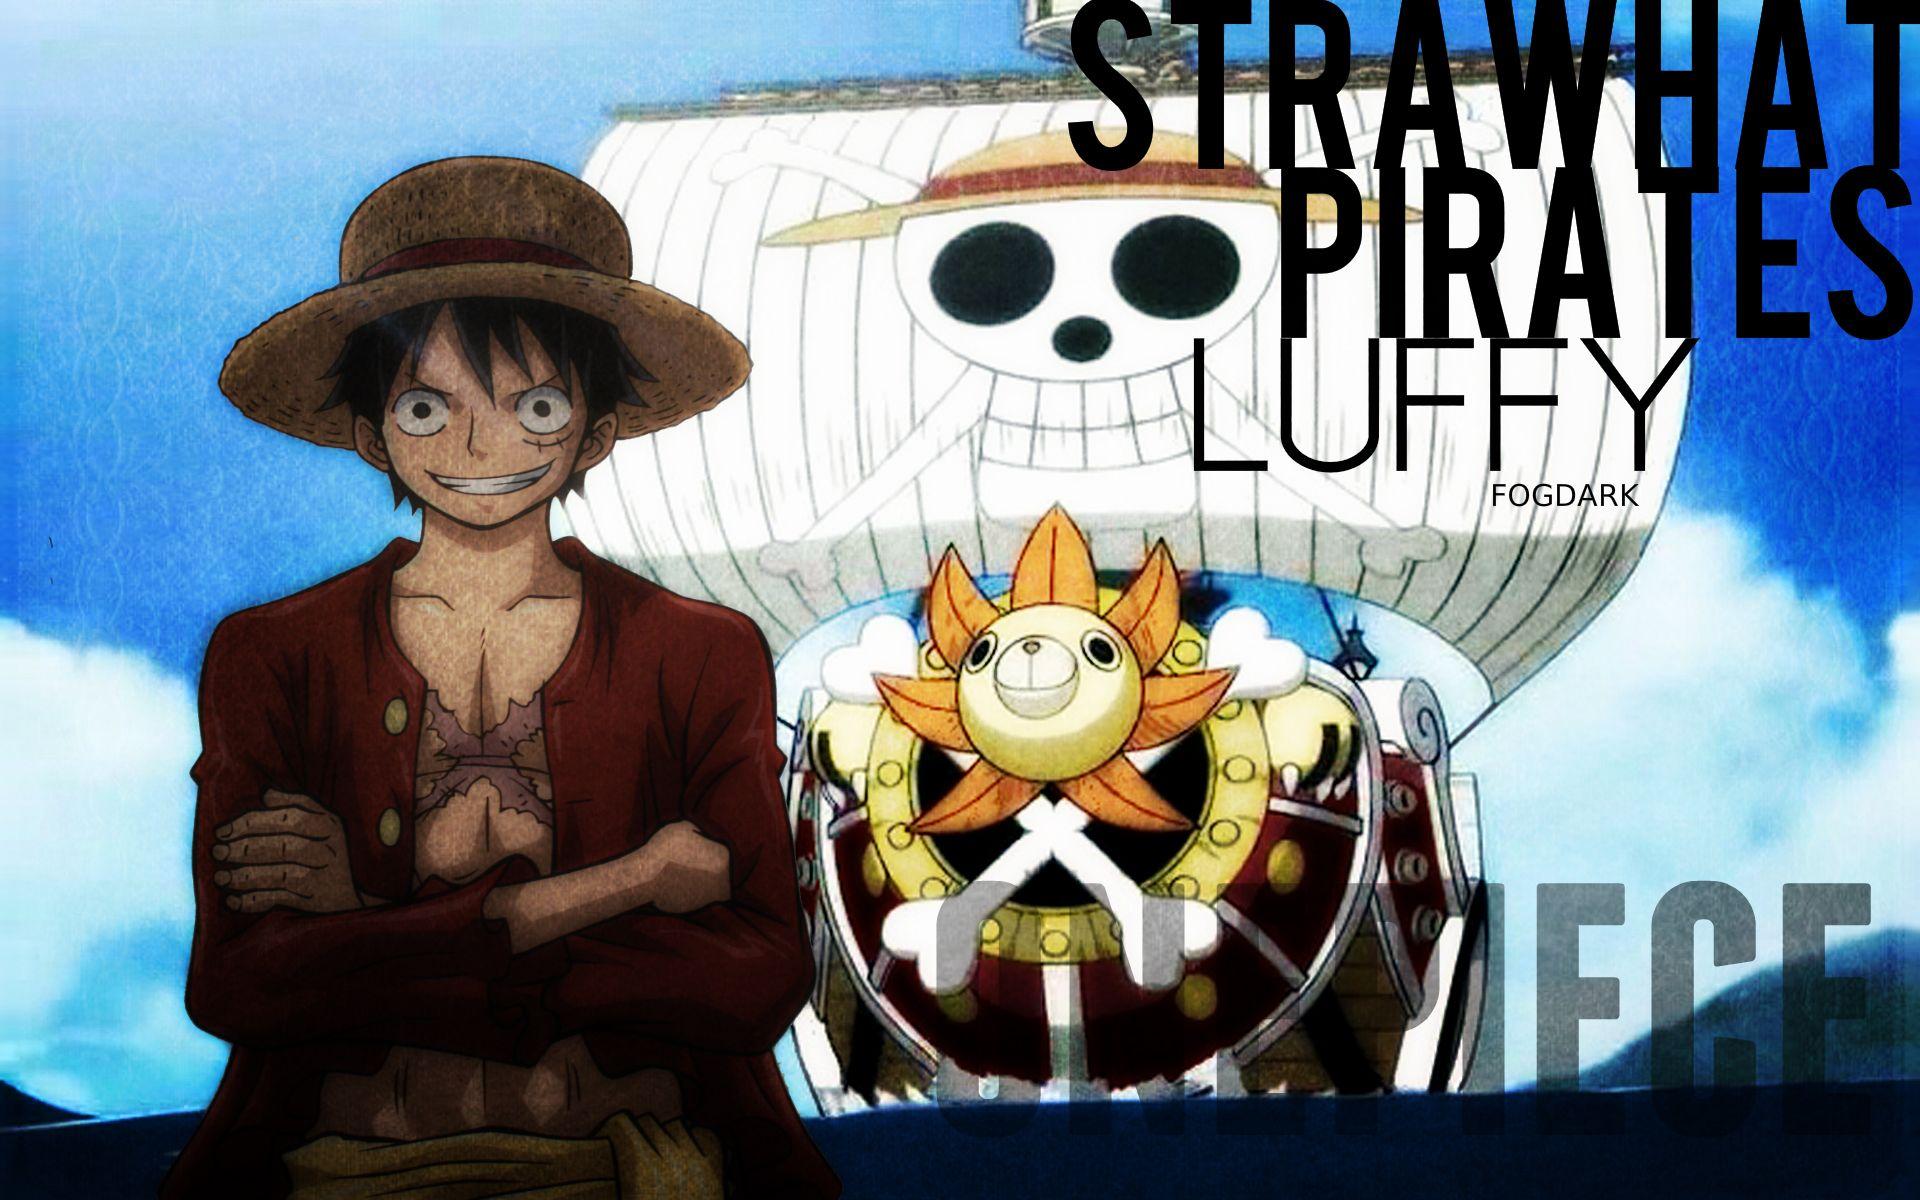 Fantastic One Piece Wallpaper. Daily Anime Art